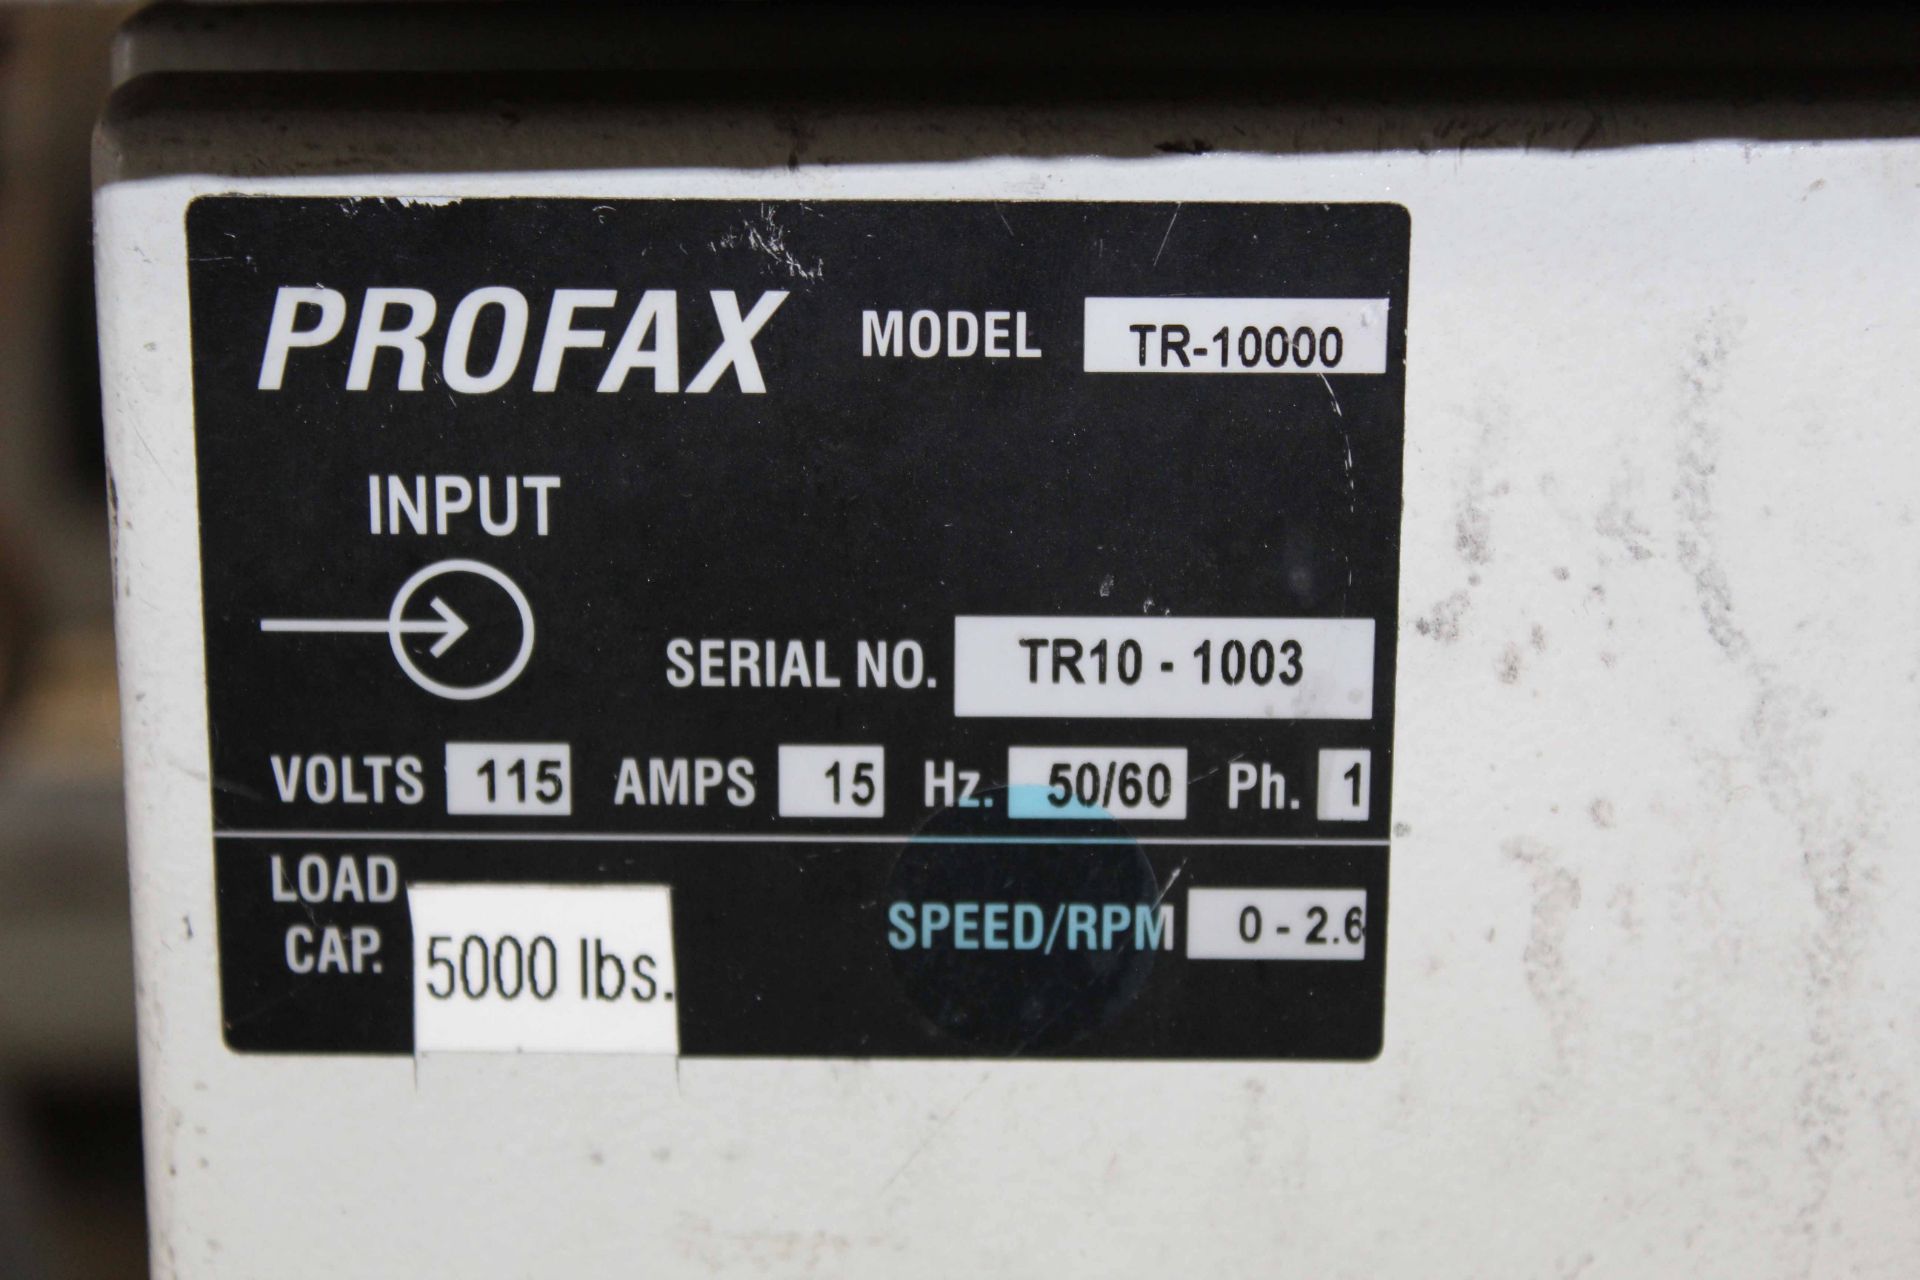 POWER TANK TURNING ROLL, PROFAX 5,000 LB. CAP. MDL. TR-10000, 115 v., 0 to 2.6 RPM, S/N TR10-1003 - Image 3 of 3